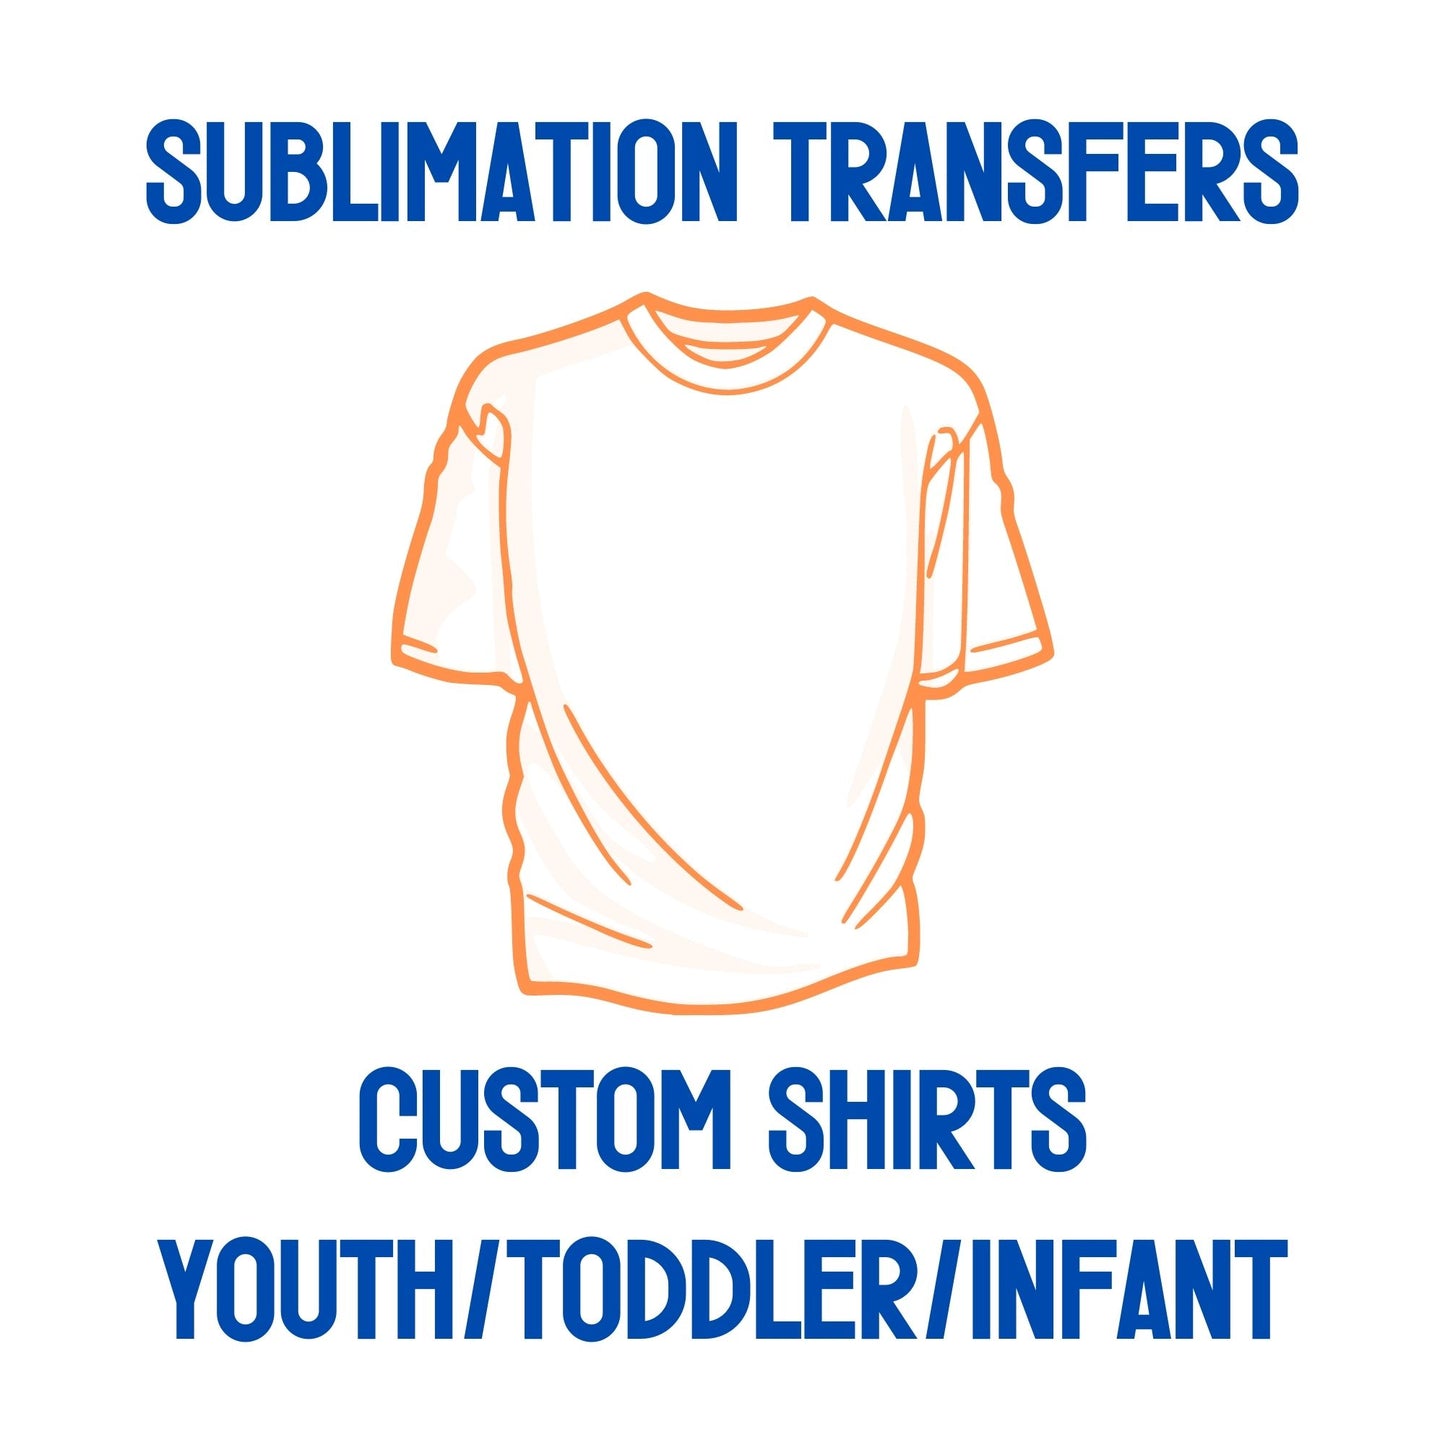 Youth/ Toddler/ Infant - Custom Sublimation Transfers